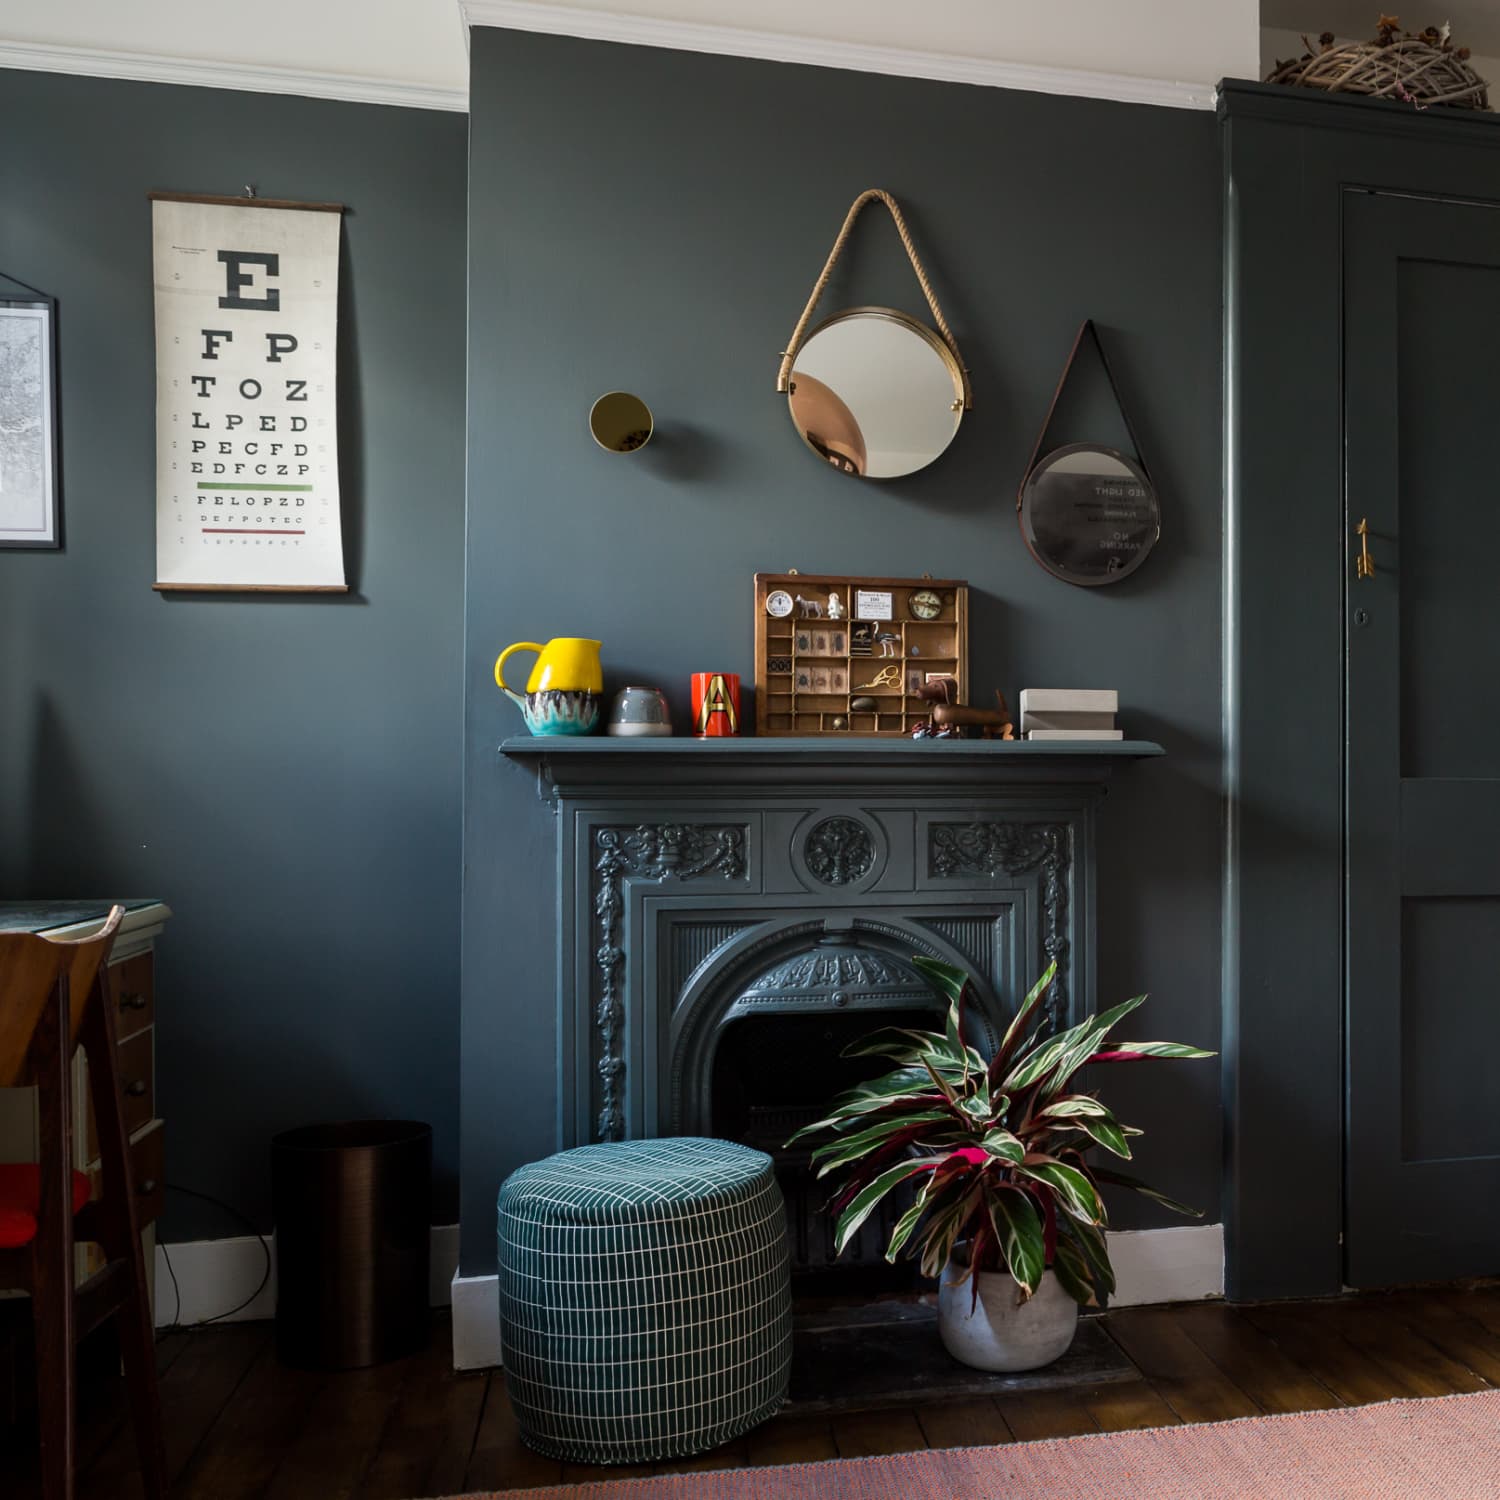 Tips for Painting Walls a Dark Color